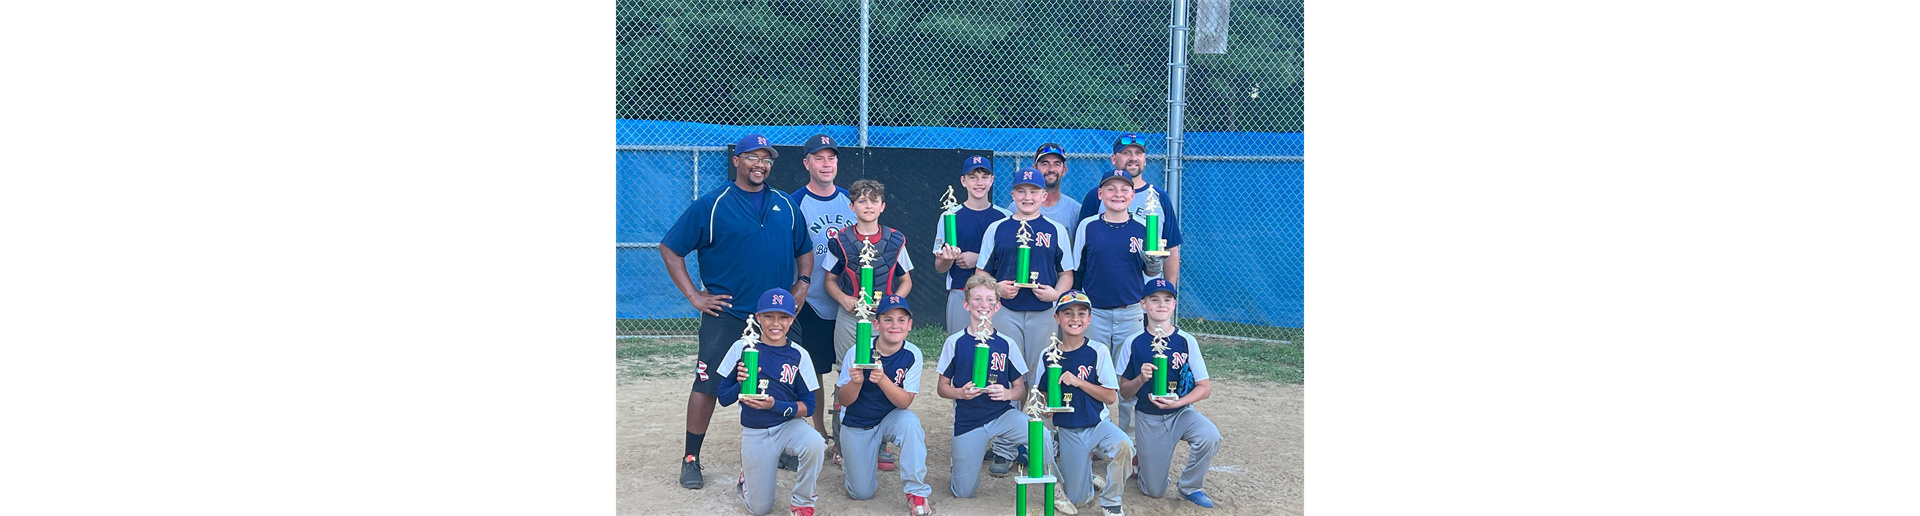 12u boys Tournament Champions! Congrats to Coach Terry and the A to Z Dependable Services squad!!